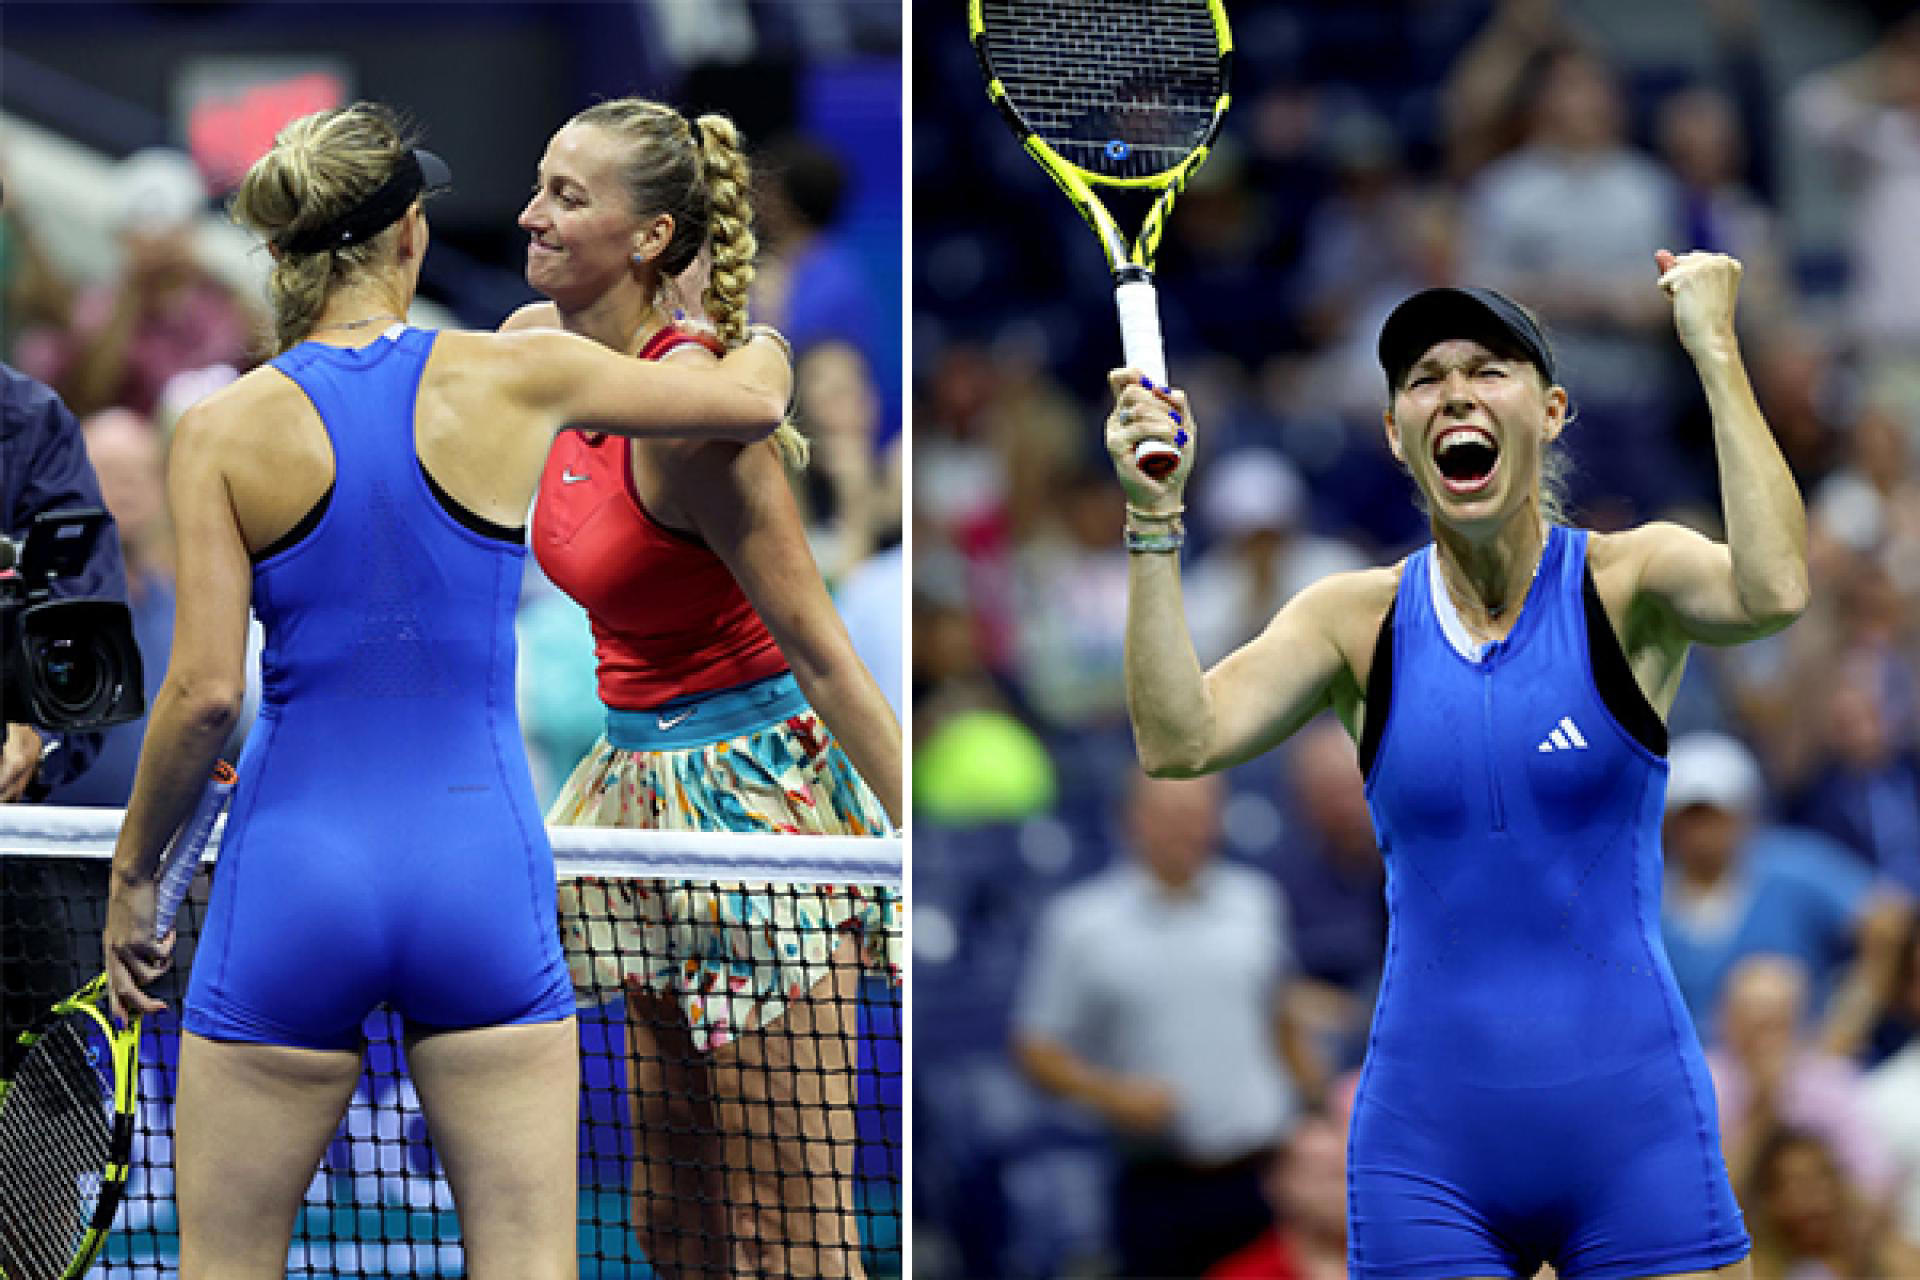 Fans react to Wozniacki's 'provocative' wrestling US Open outfit